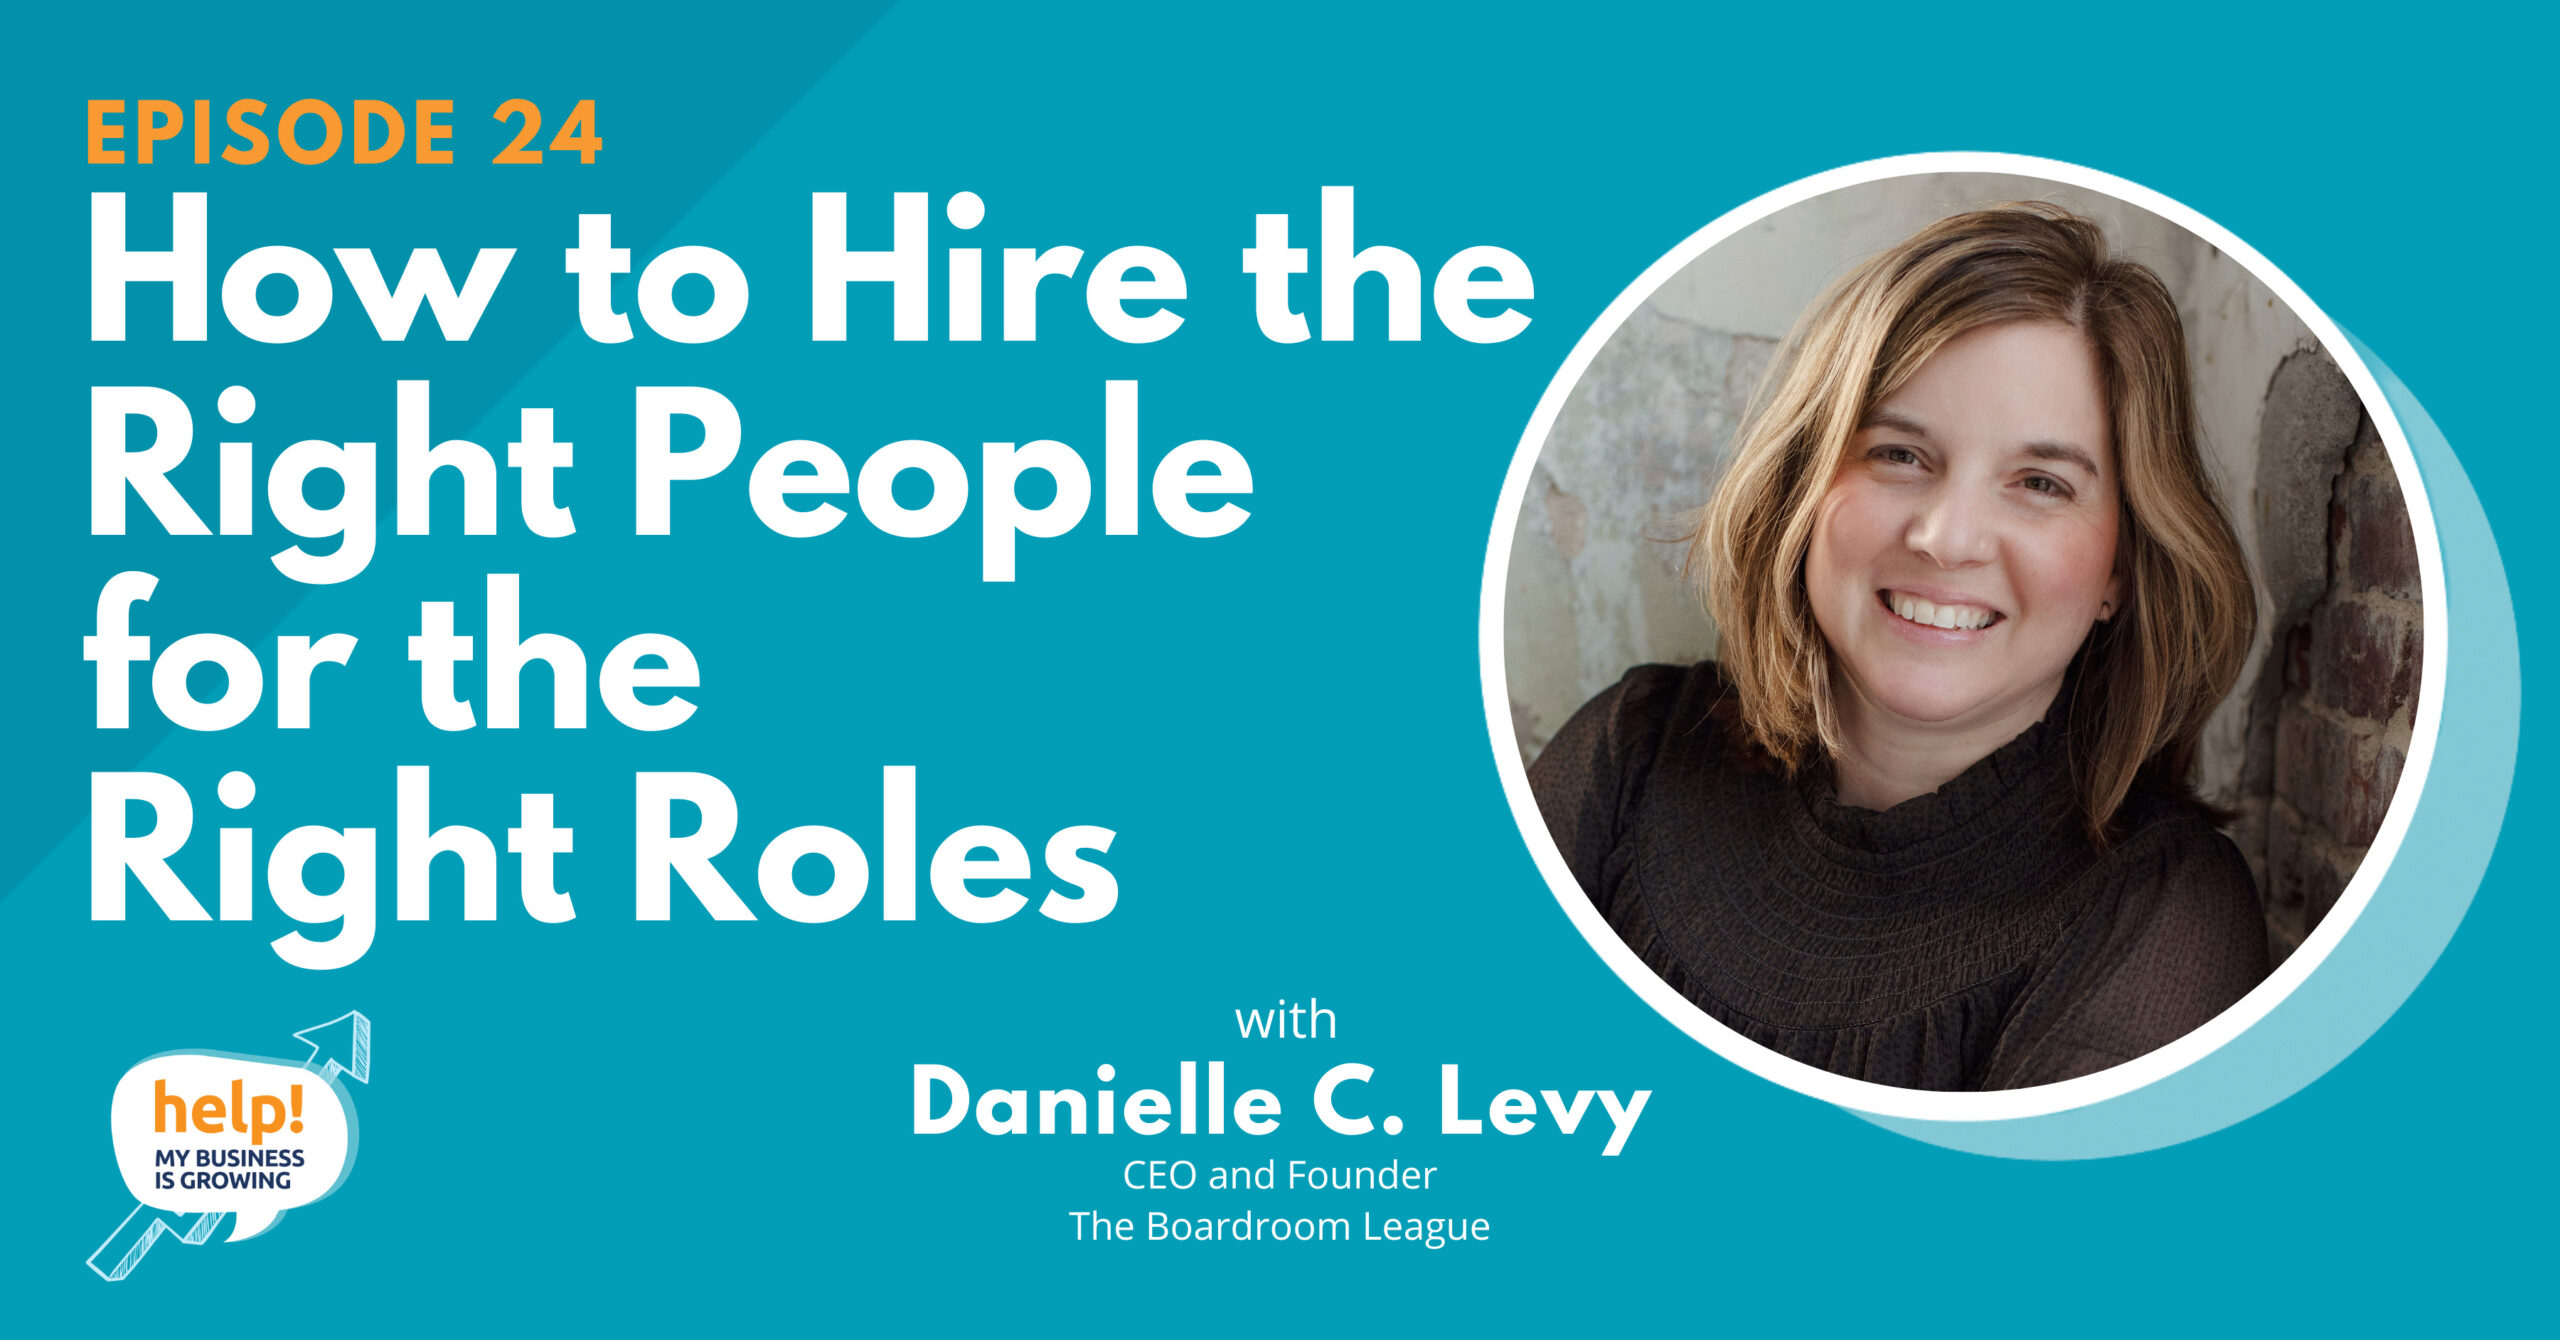 How to Hire the Right People for the Right Roles